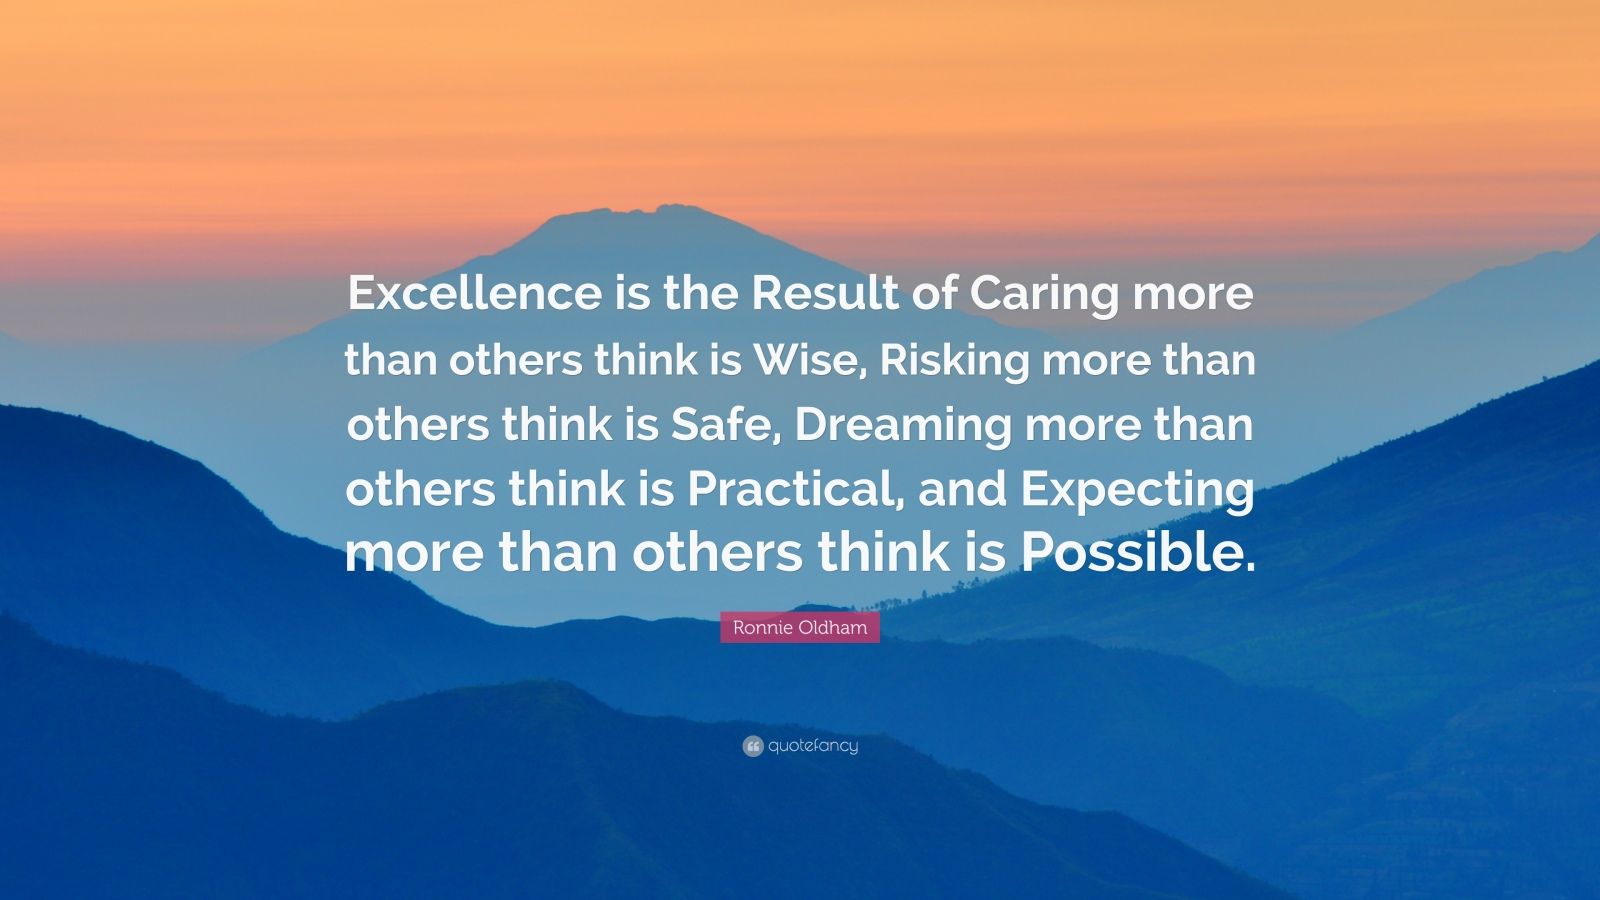 Ronnie Oldham Quote: “Excellence is the Result of Caring more than